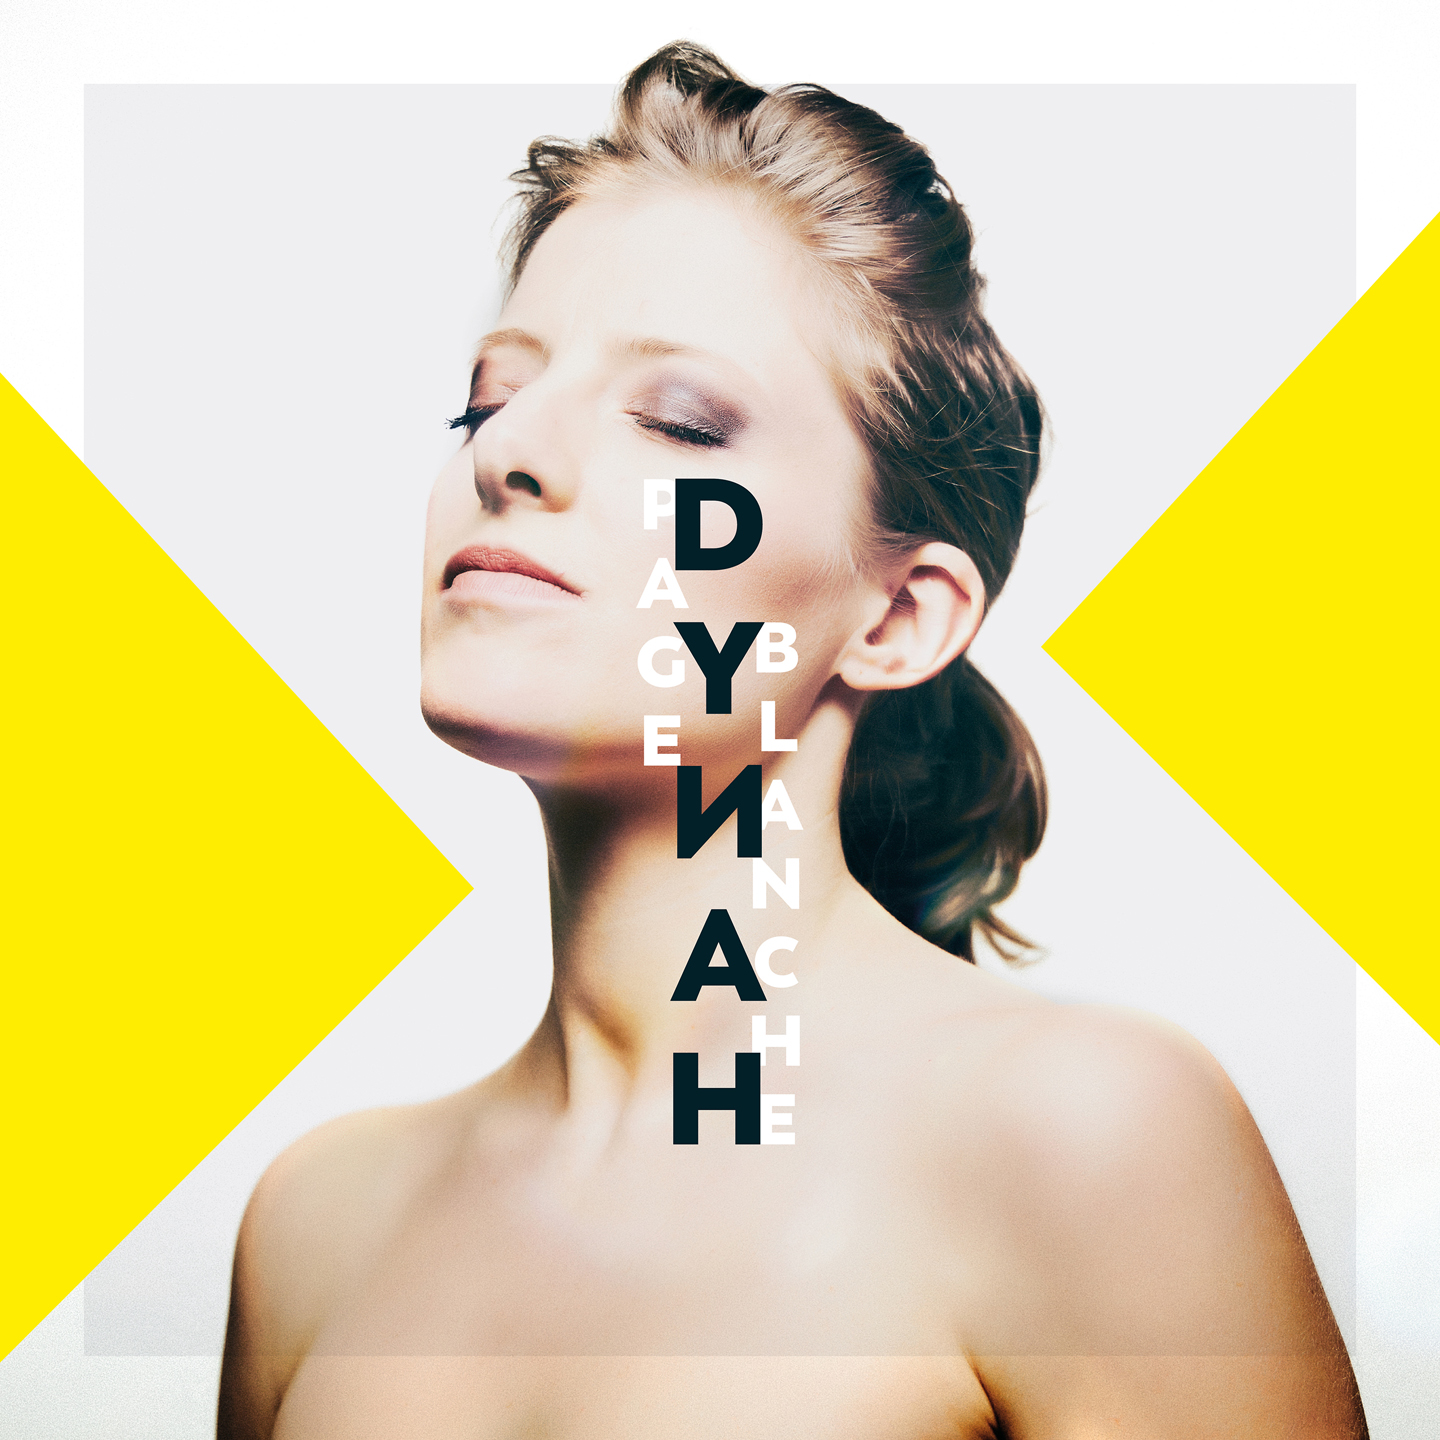 Dynah - Page Blanche